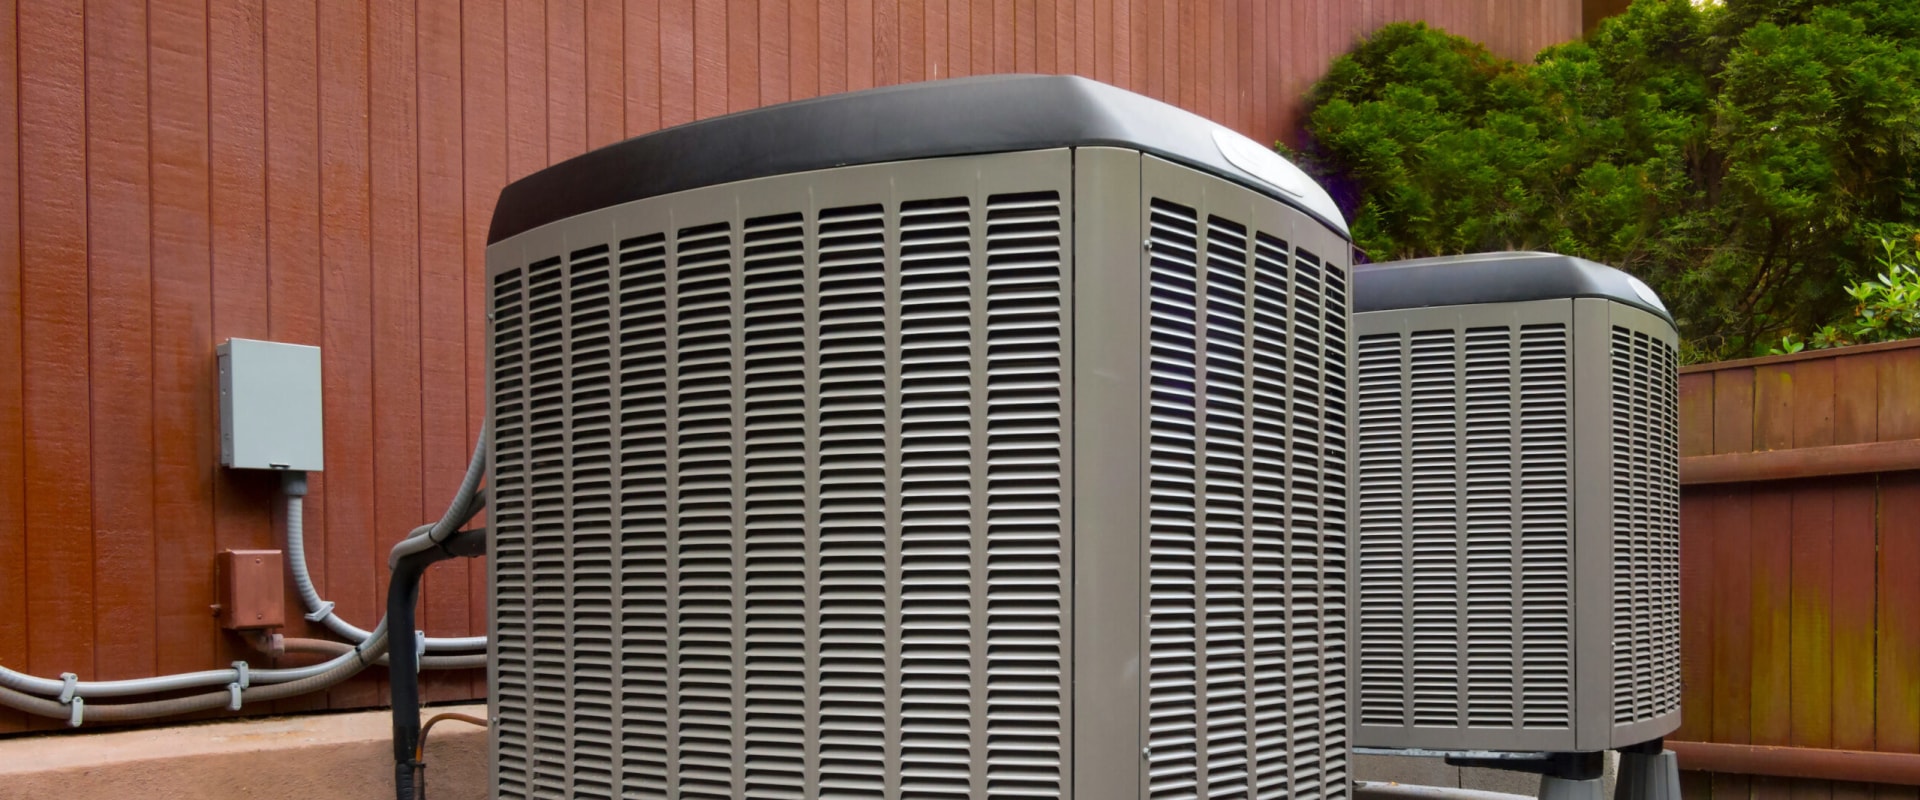 Which ac brand lasts the longest?